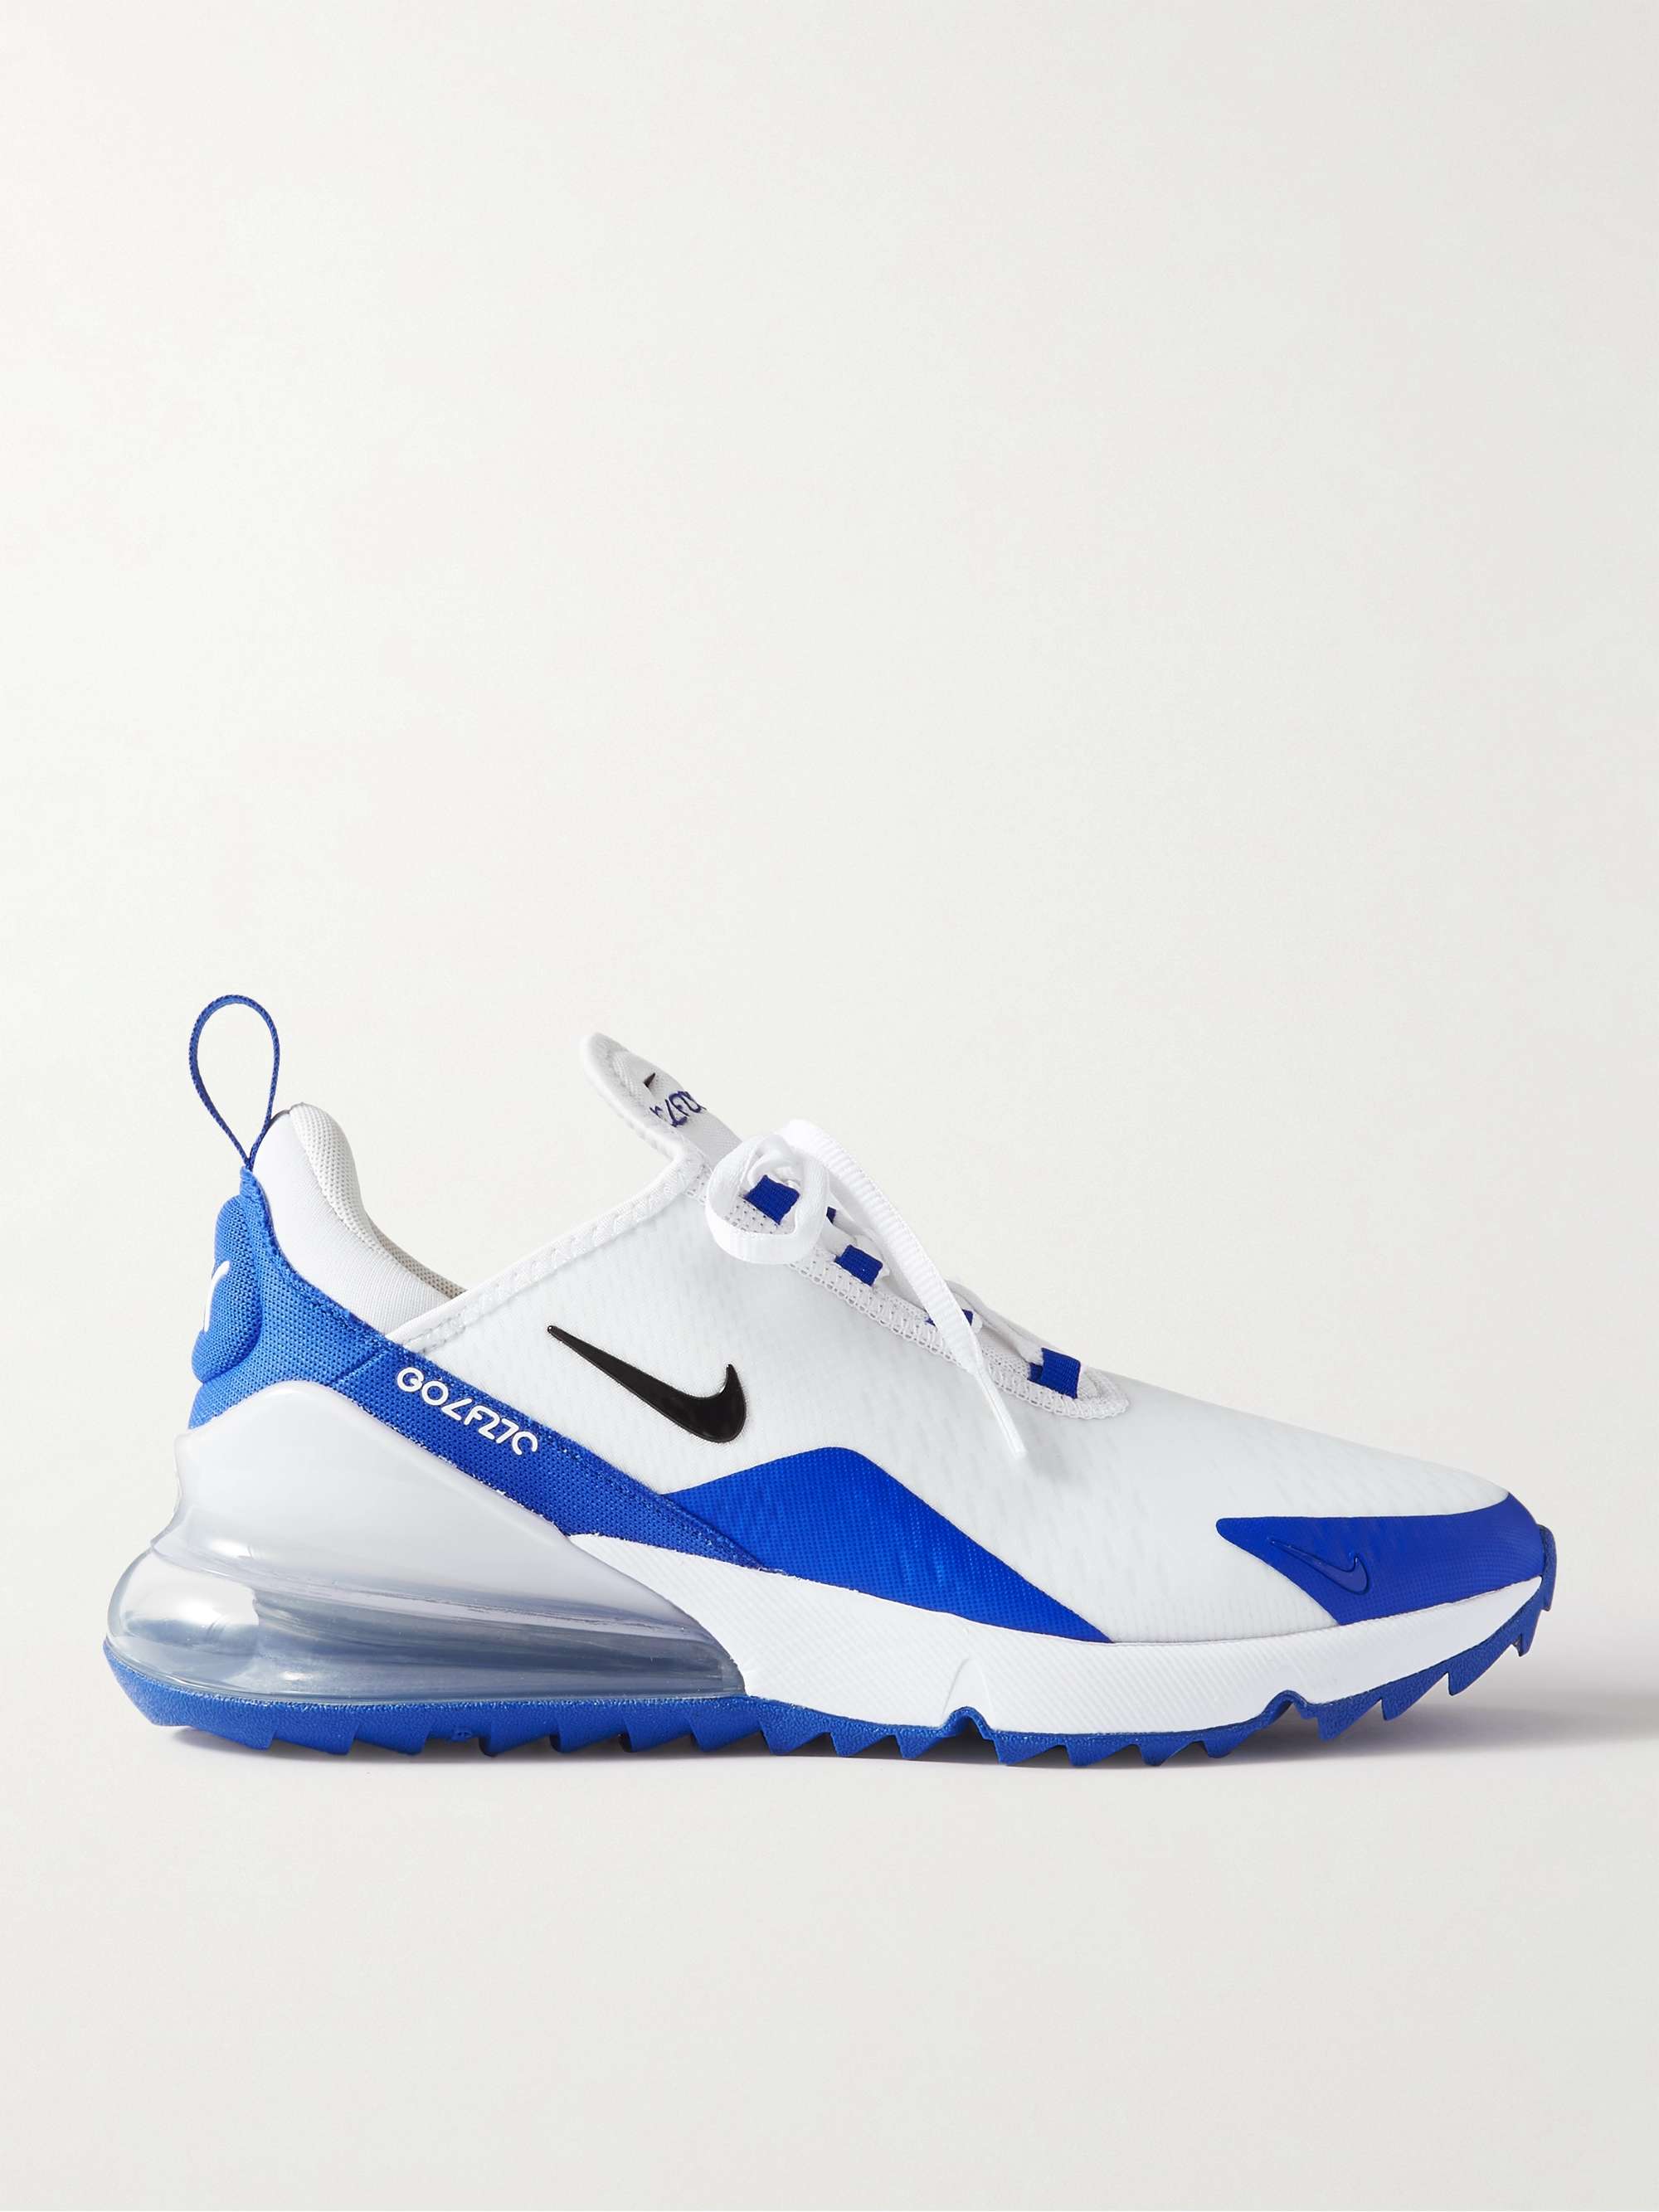 NIKE GOLF Air Max 270 G Rubber-Trimmed Ripstop and Mesh Golf Shoes